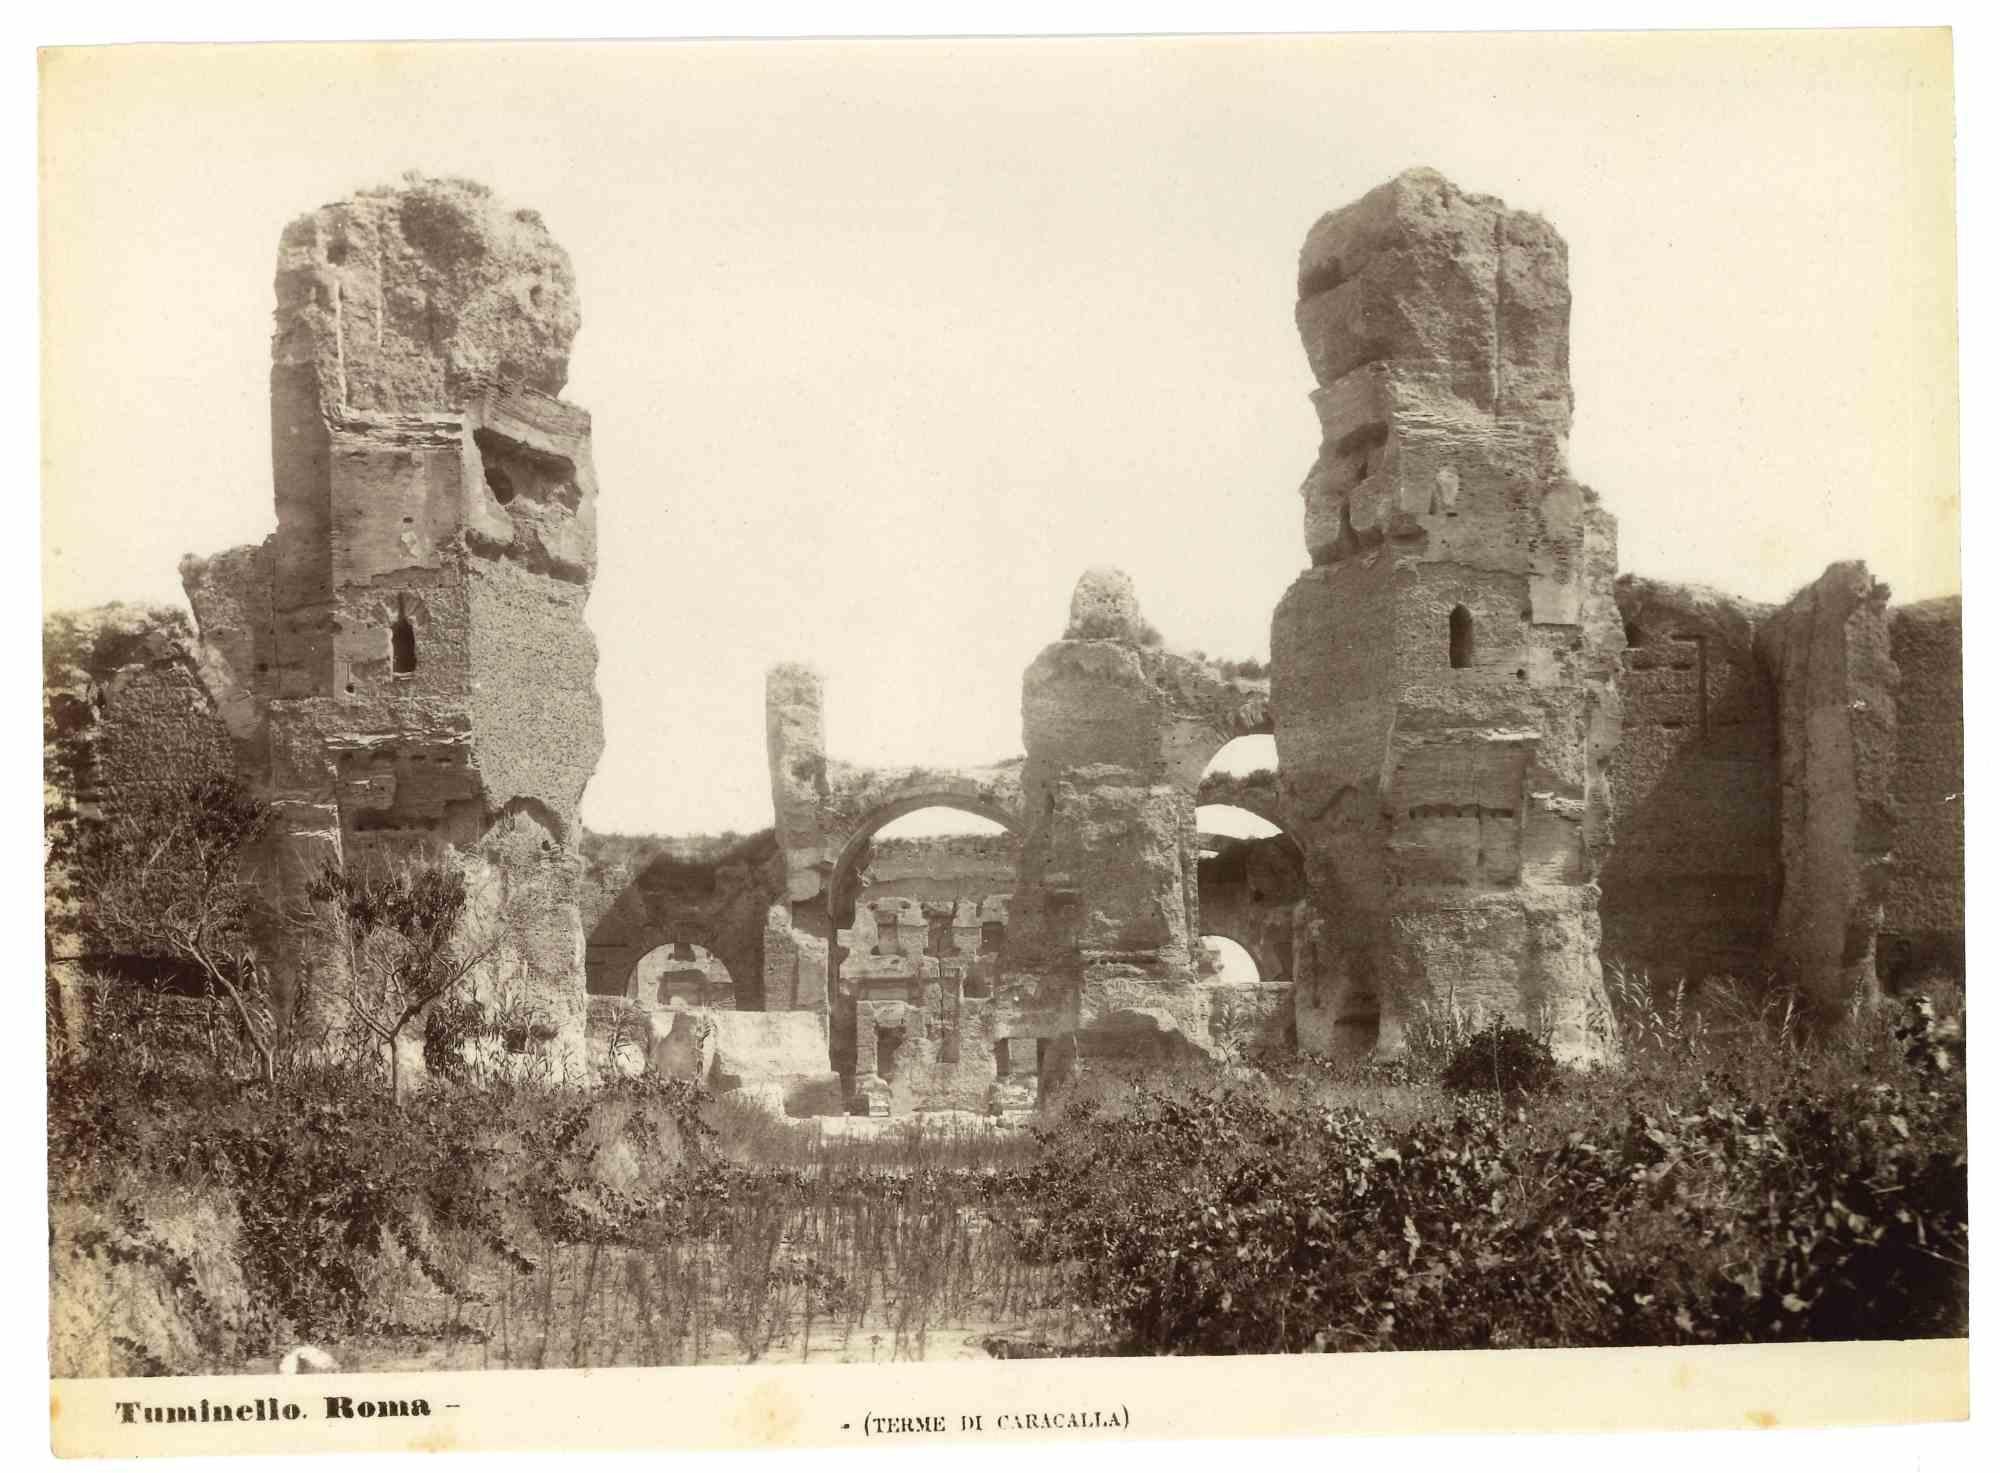 Unknown Landscape Photograph - Baths of Caracalla - Vintage Photograph - Early 20th Century